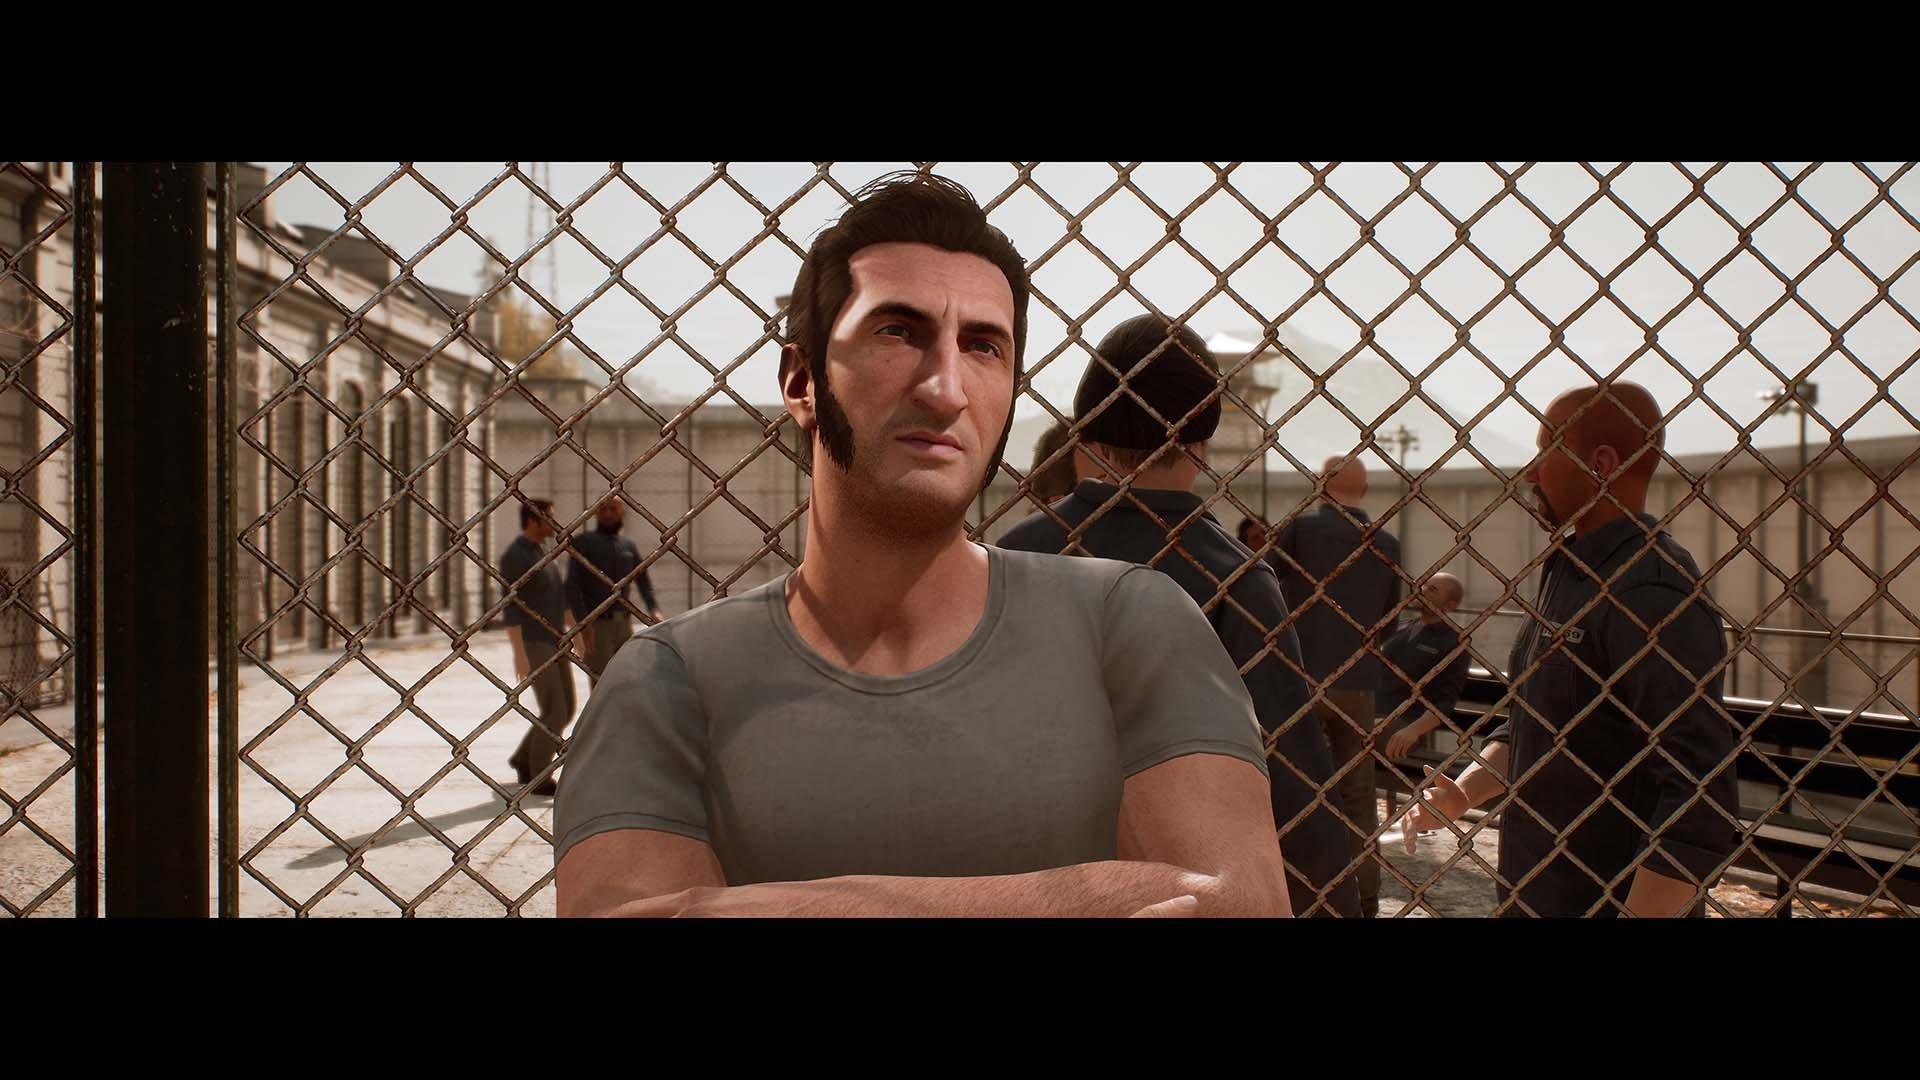 A Way Out - PS4, PlayStation 4